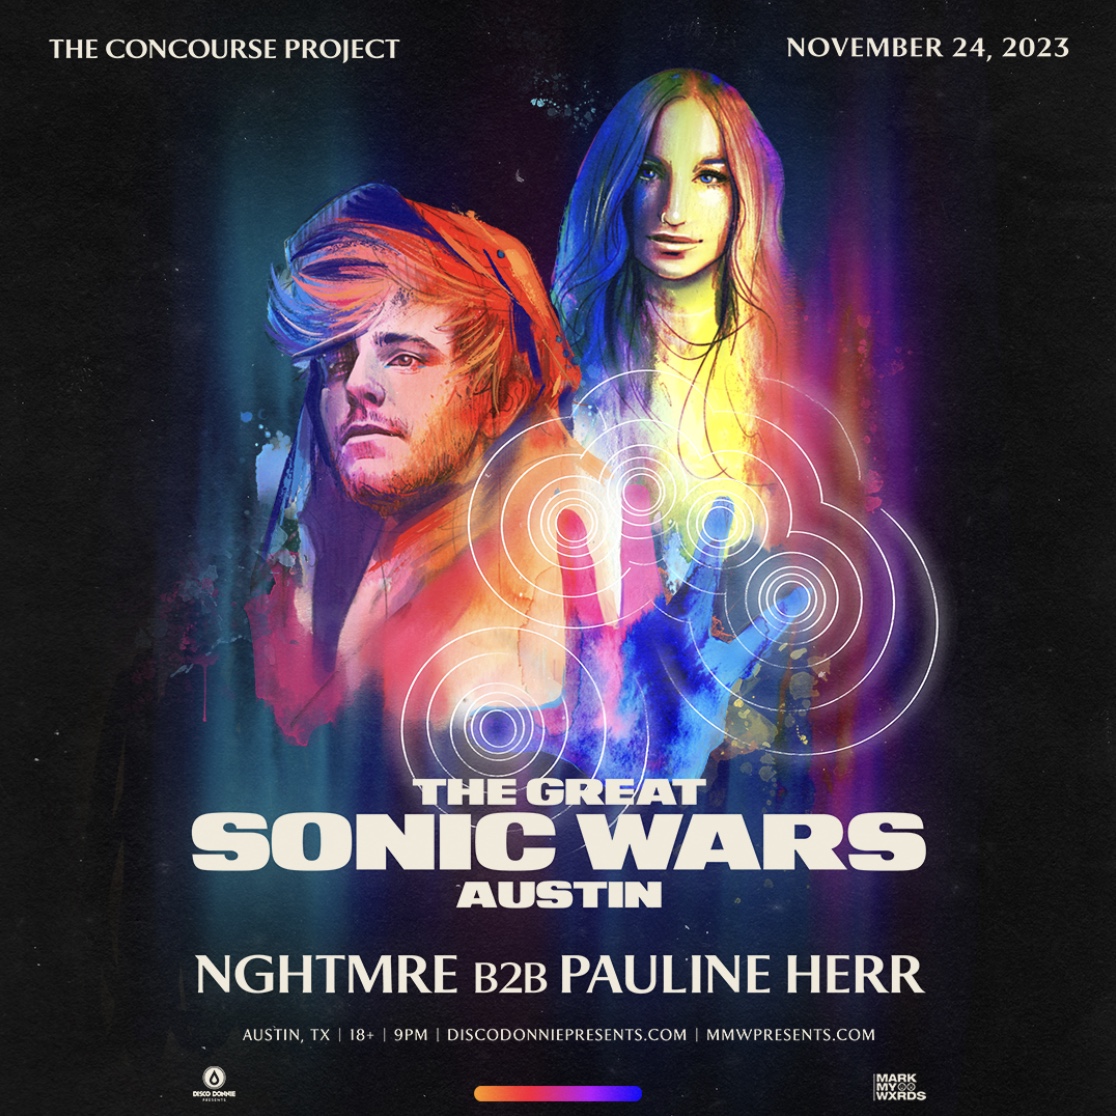 NGHTMRE b2b Pauline Herr at The Concourse Project